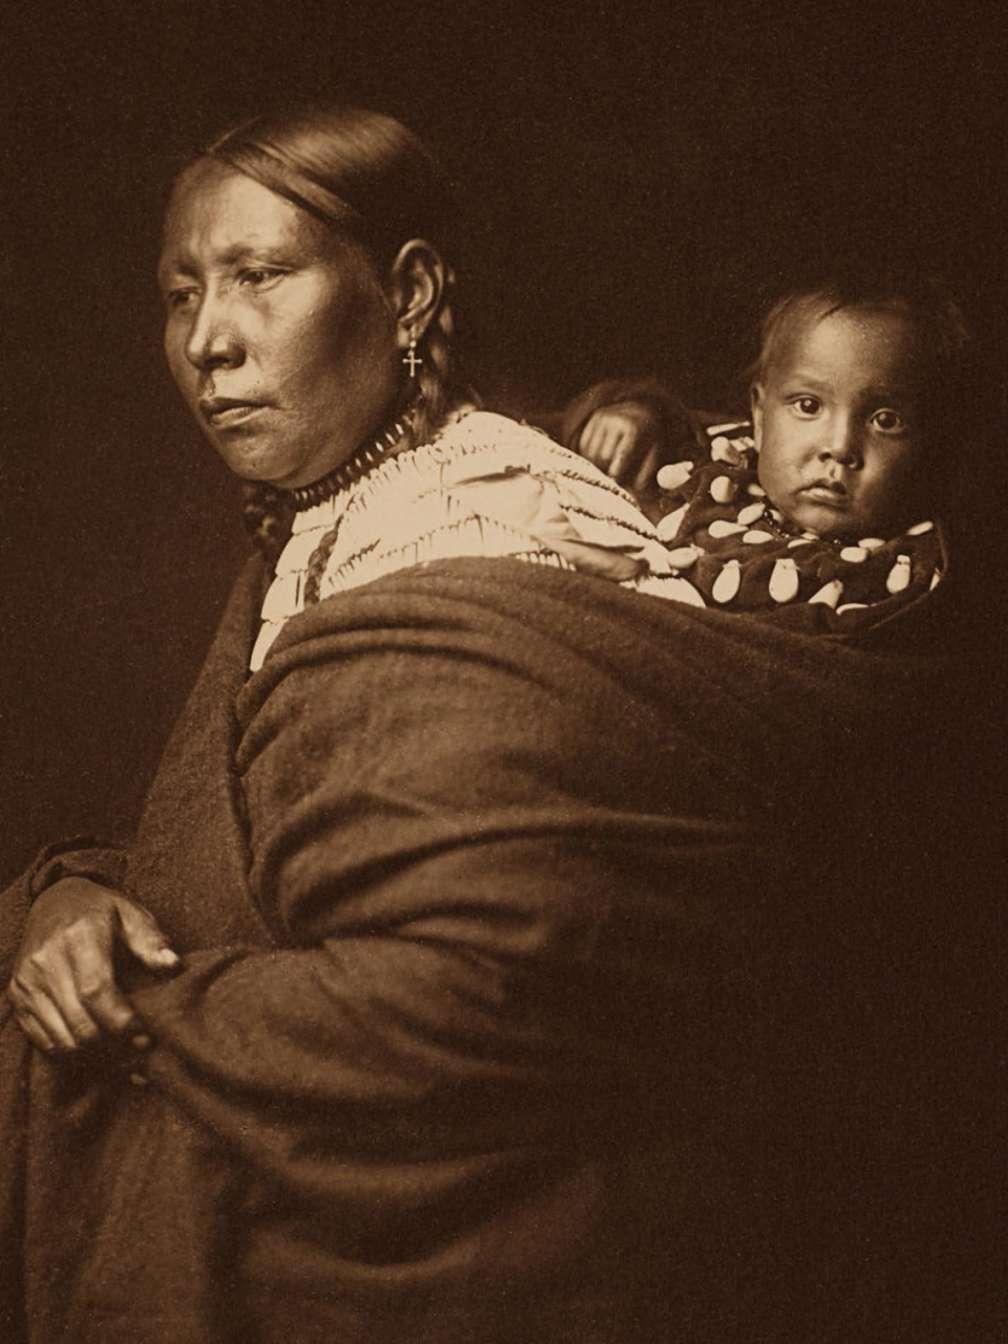 This Sioux mother with a curious baby on her back posed in 1905.